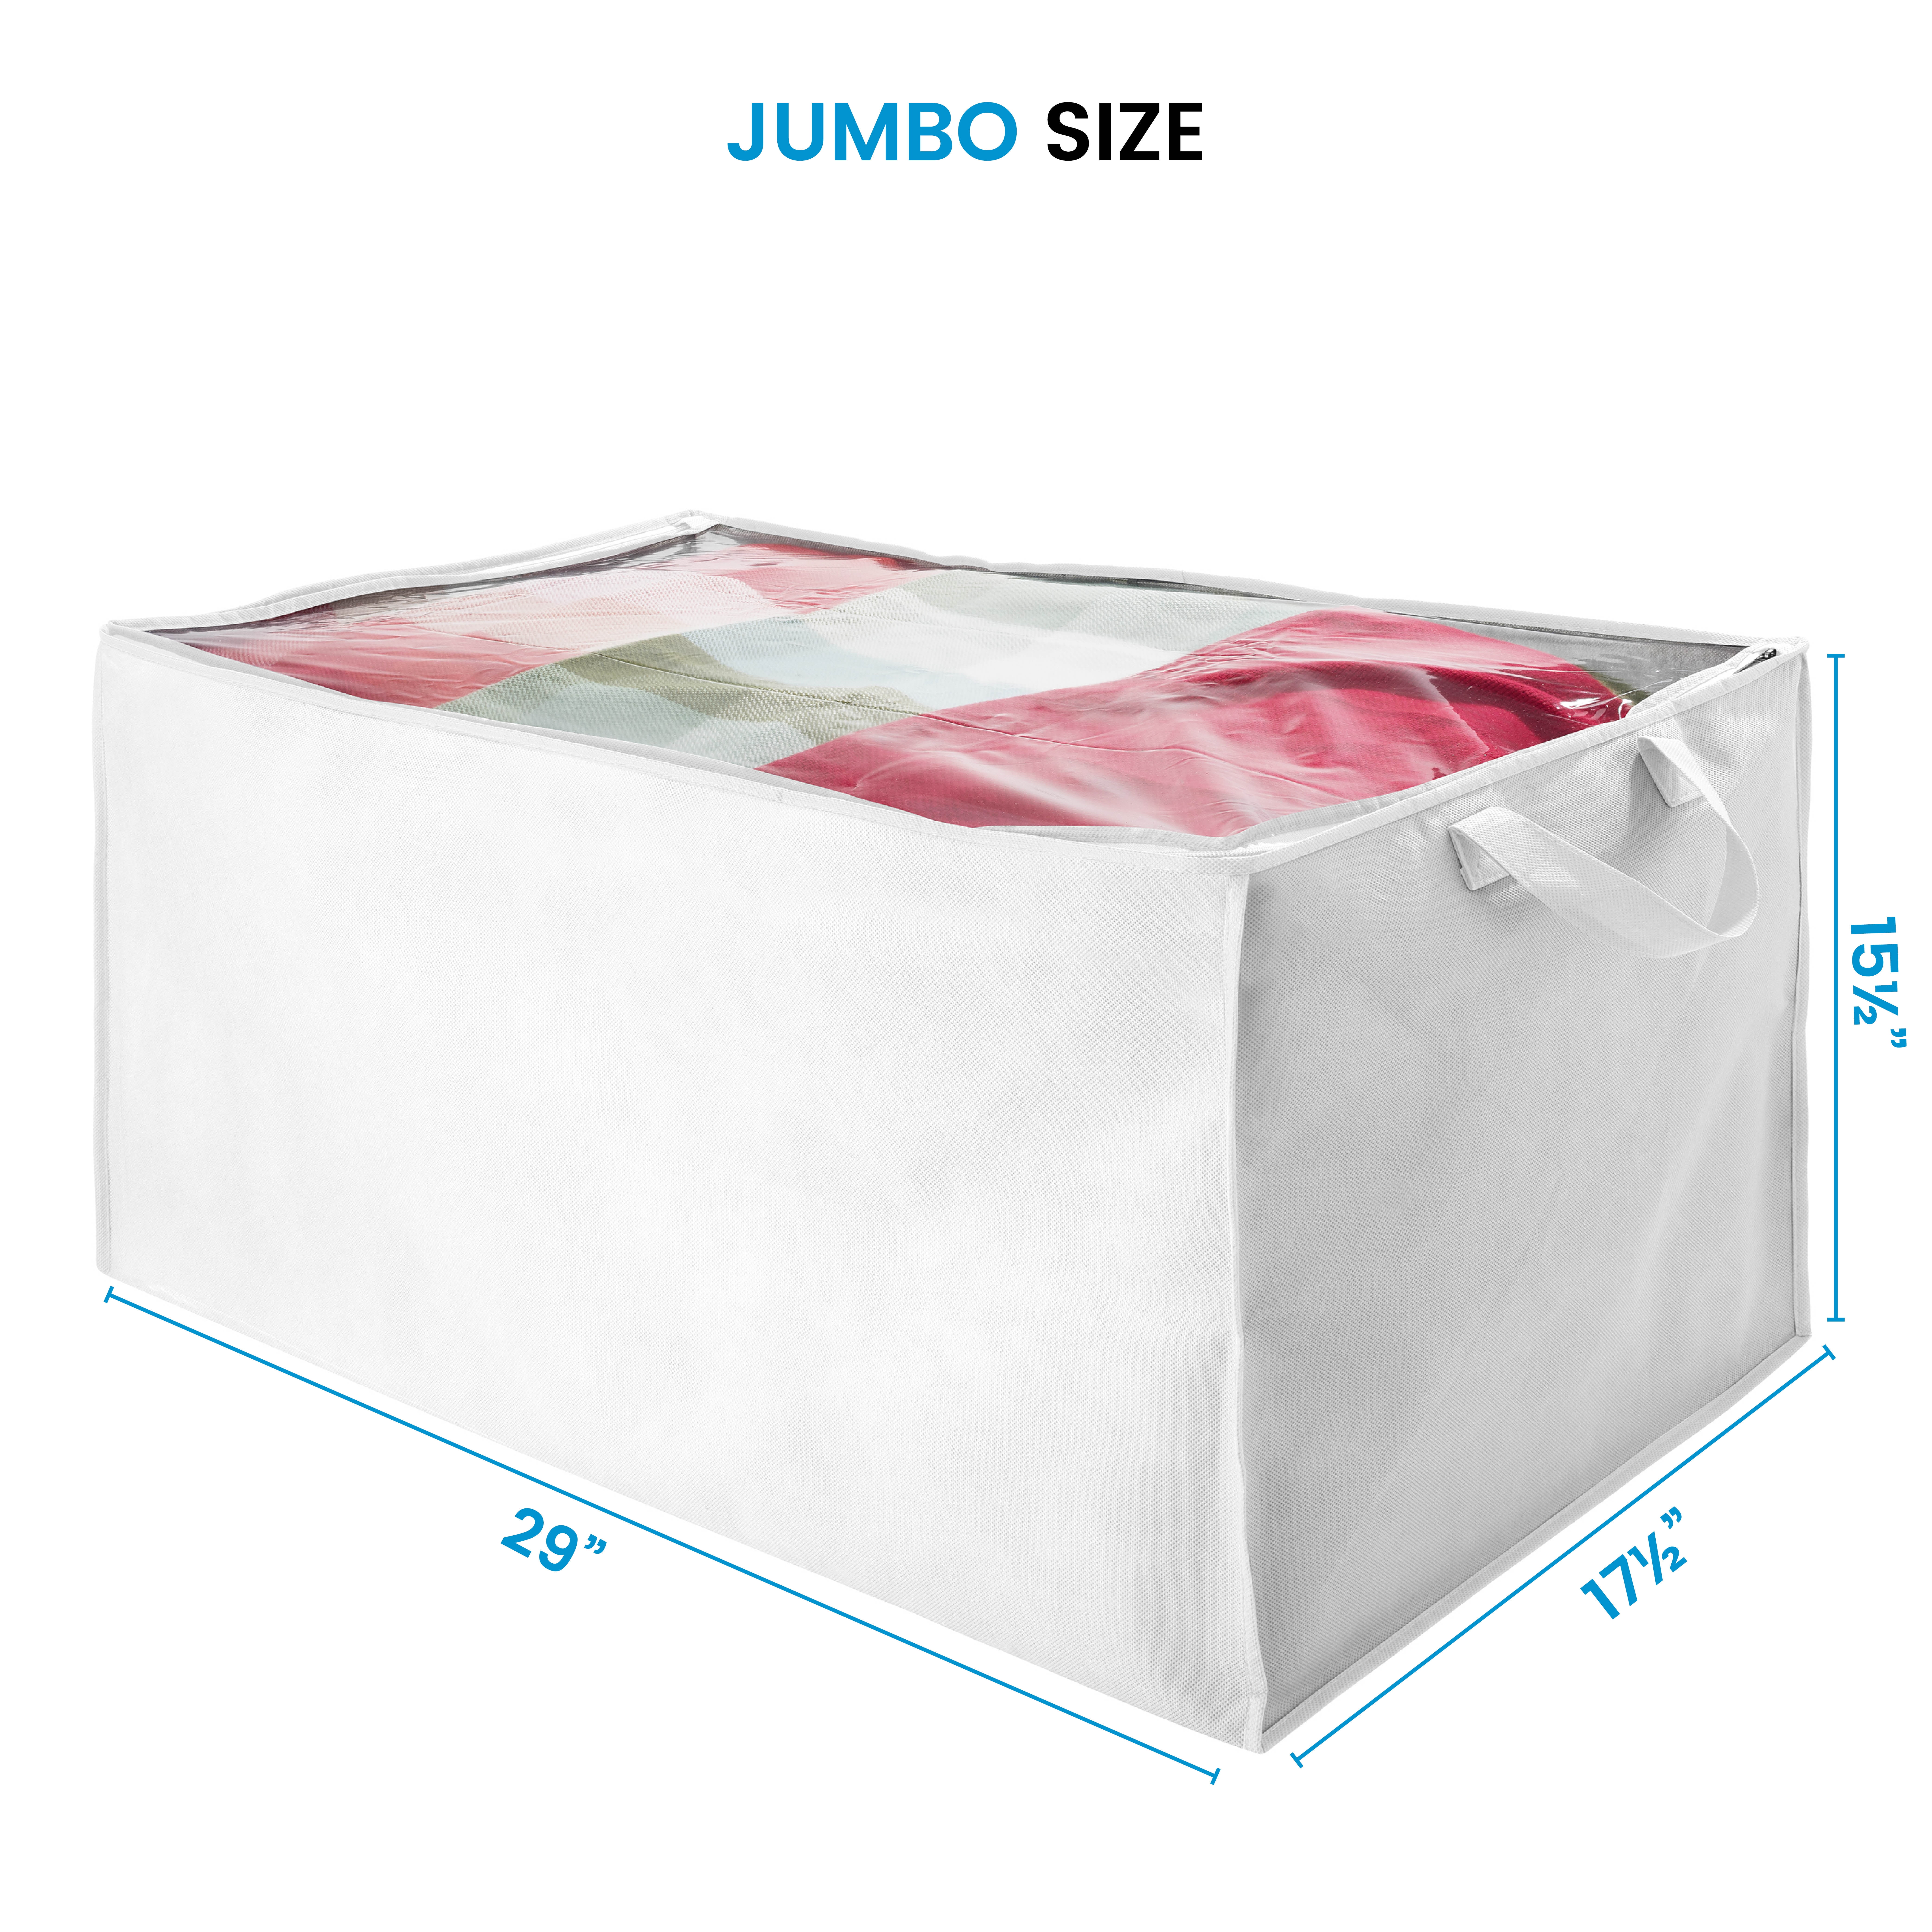 AllTopBargains 6ct Jumbo Storage Bags XXL Resealable Zipper Case 22x24 Clothes Blanket Travel, Size: 2XL, White